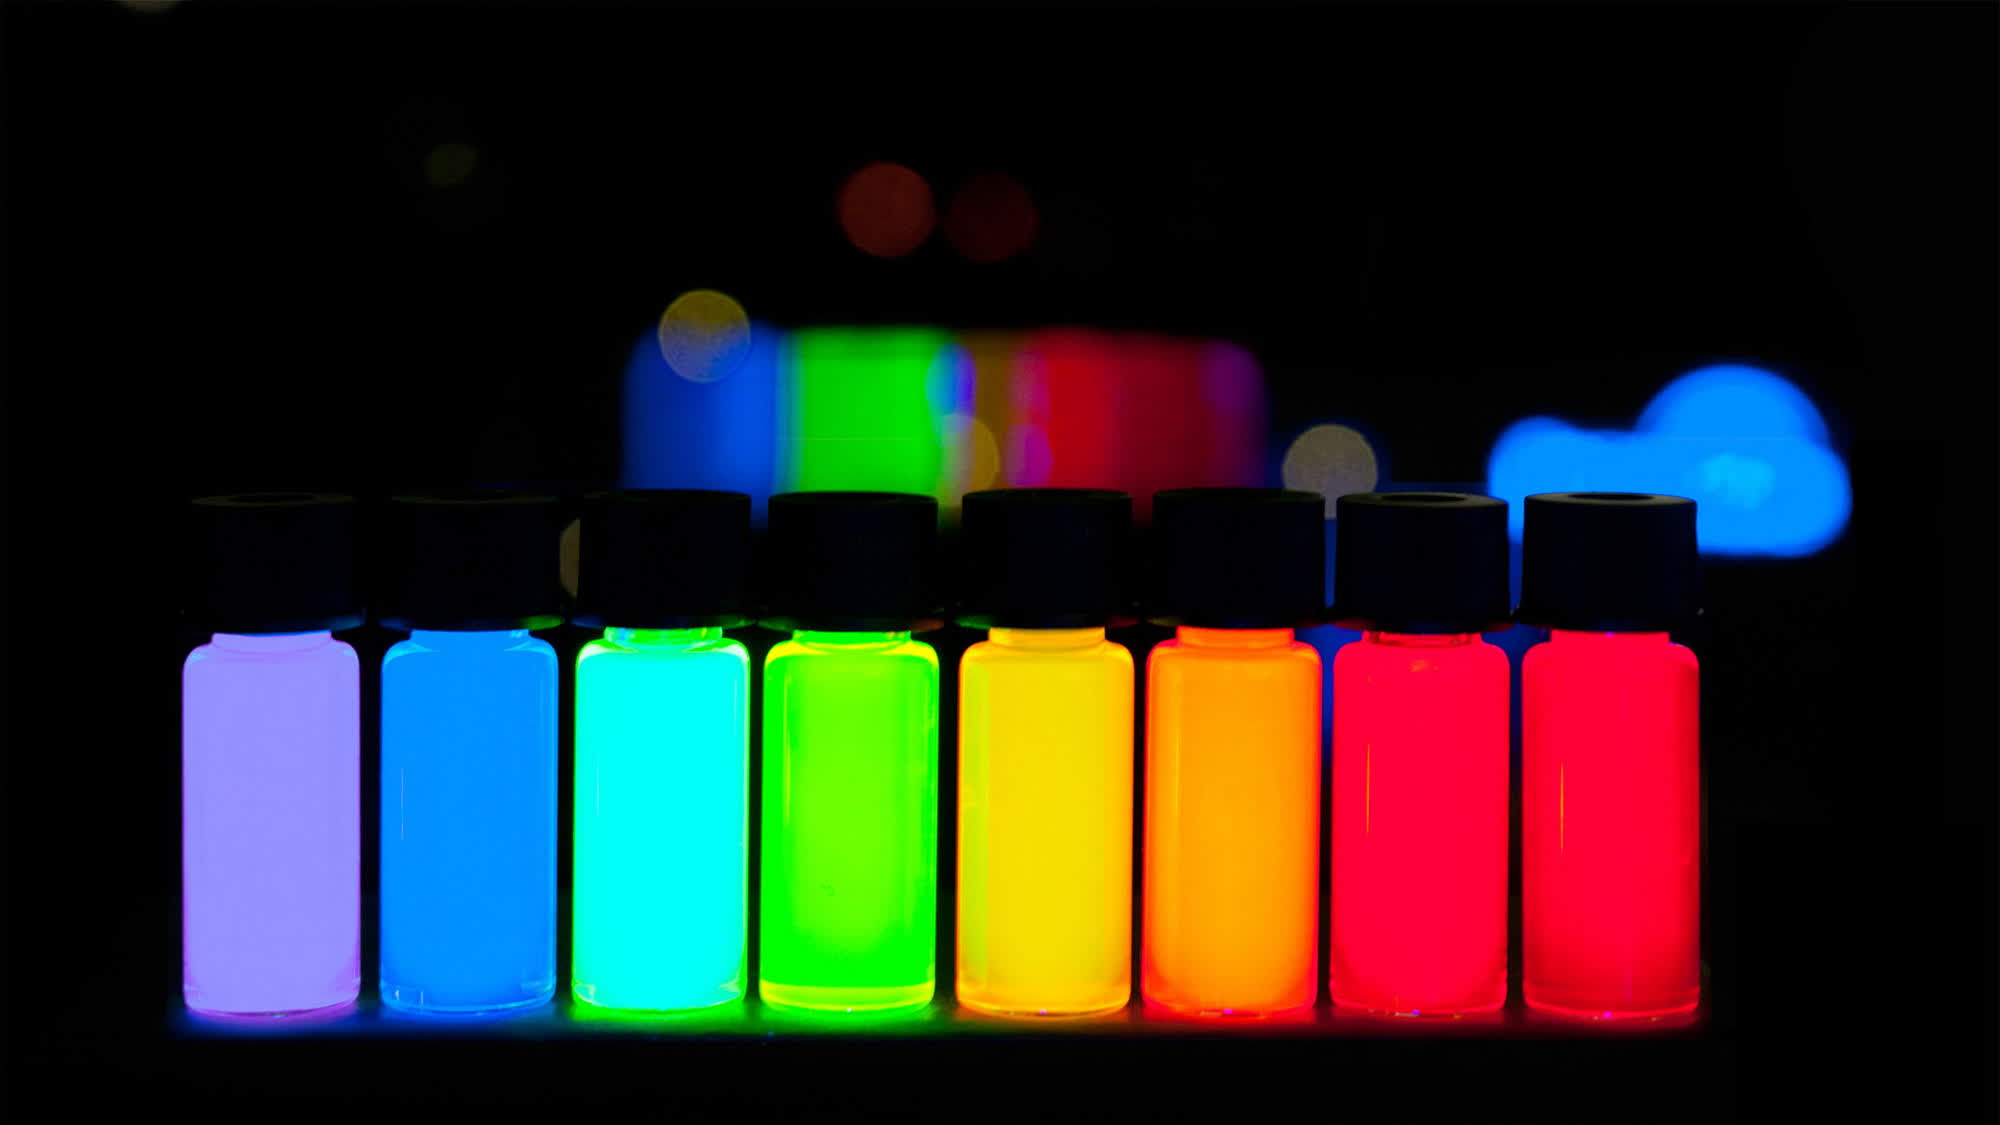 Canon developed quantum dots that don't need rare-earth elements